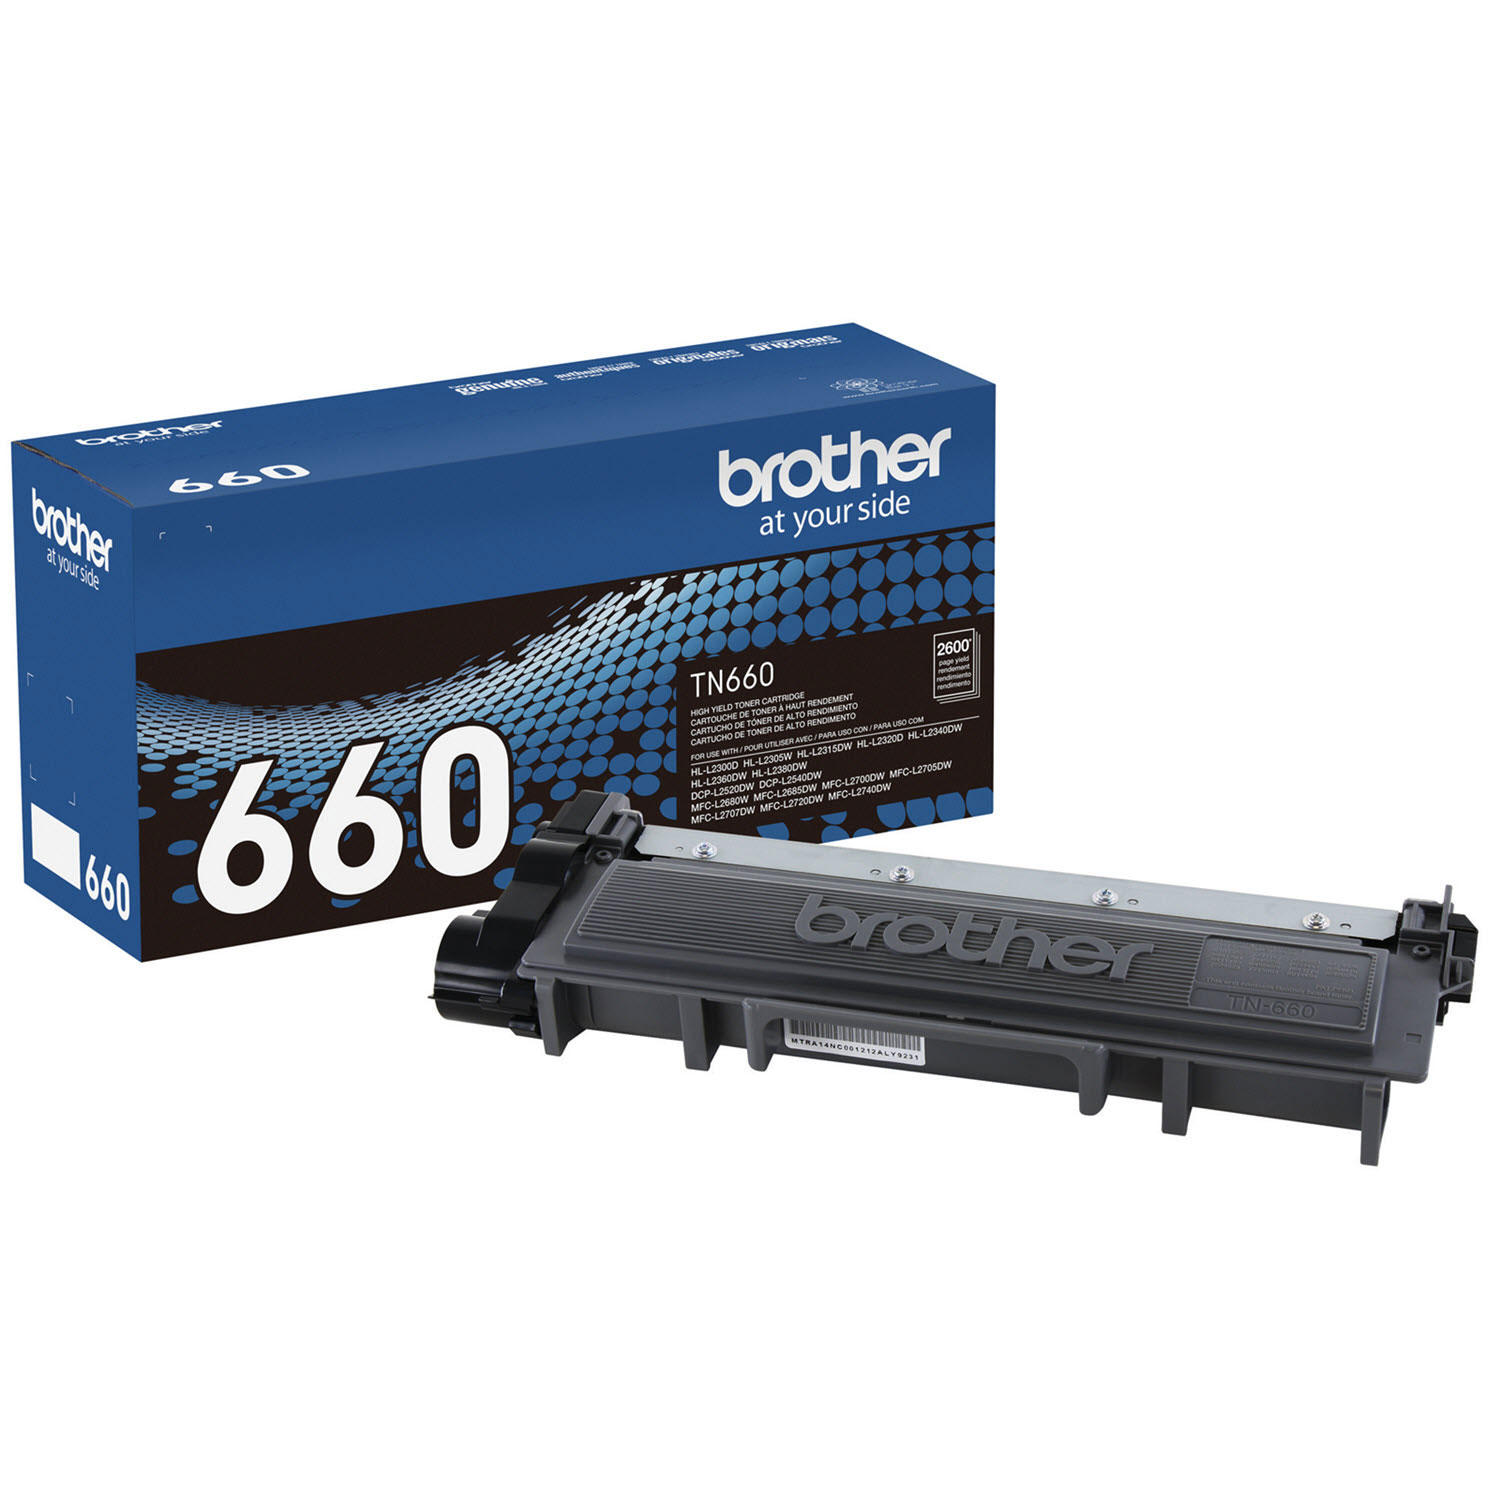 Brother TN660 High Yield Toner, Black - Save $5 with purchase of Member's Mark Multipurpose Bright Copy Paper Case